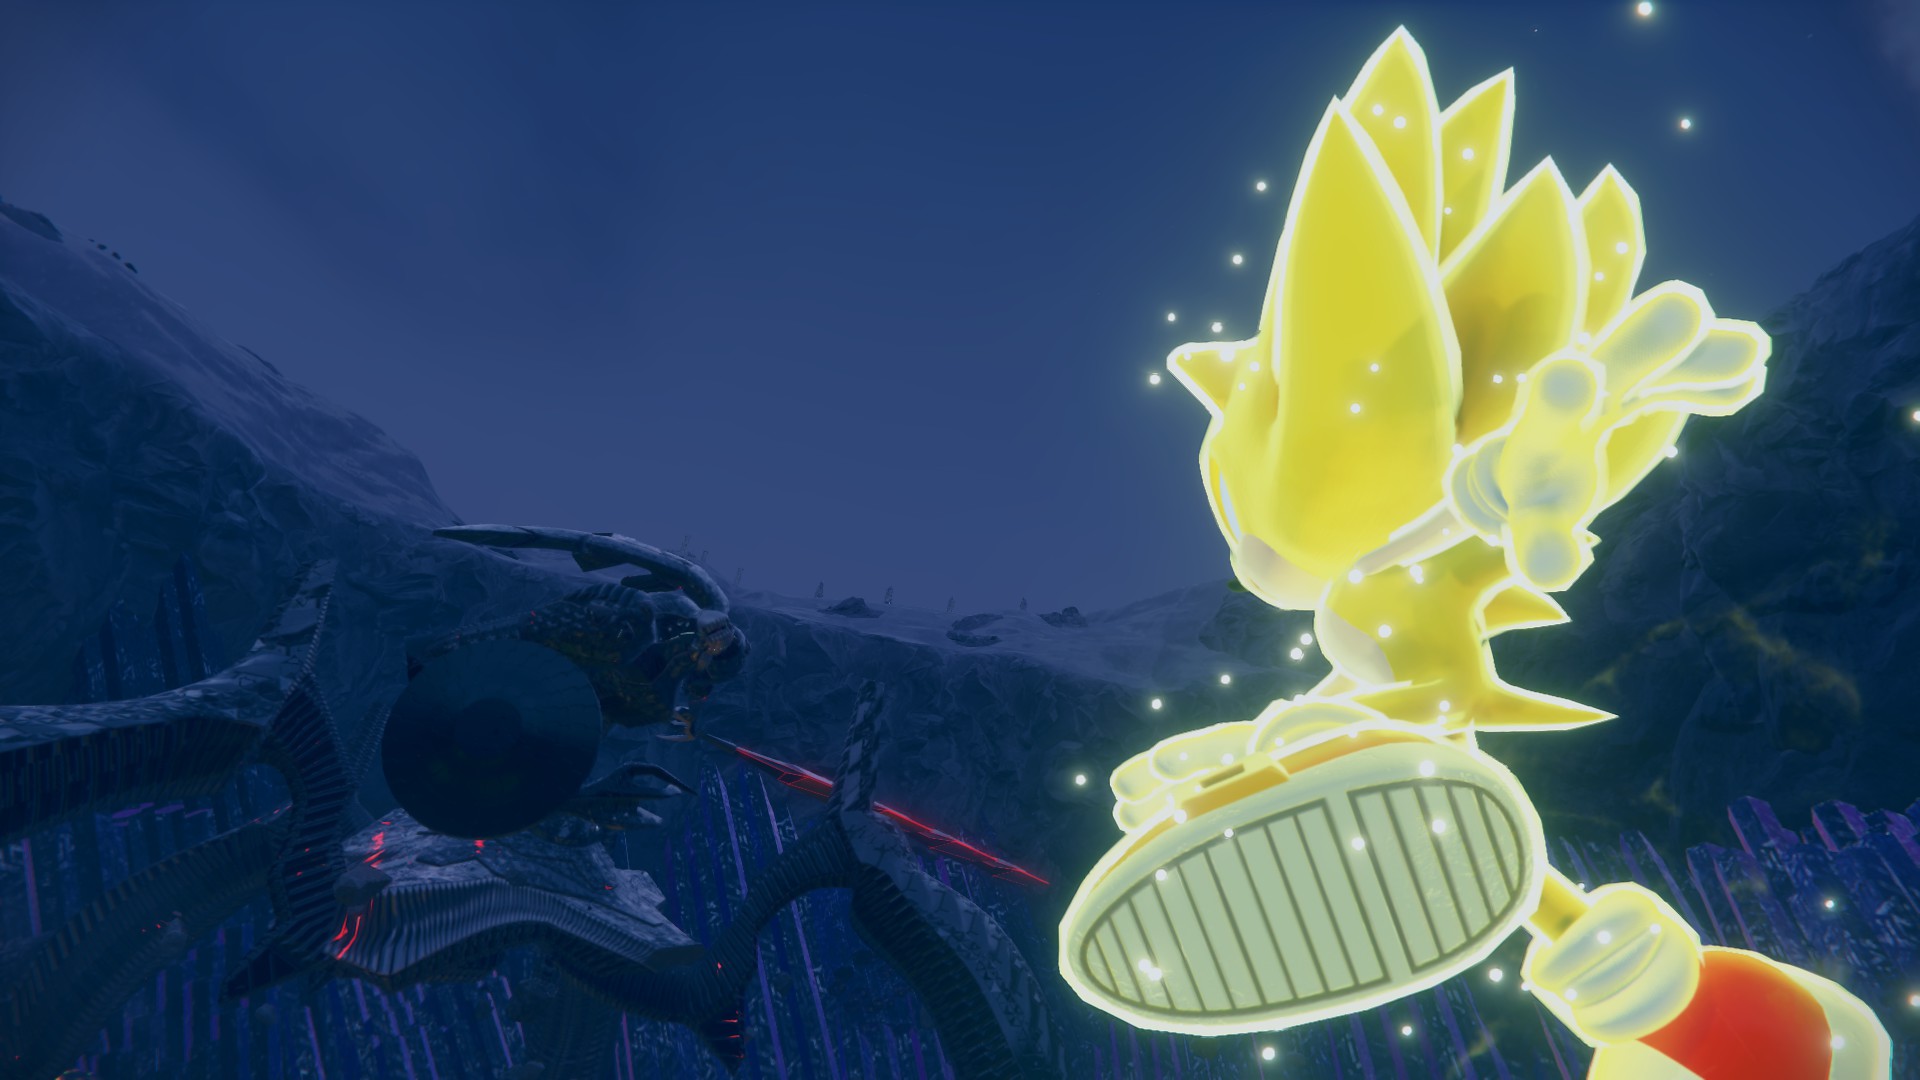 Super Sonic Will Apparently Be Mandatory For Some Bosses In Sonic Frontiers